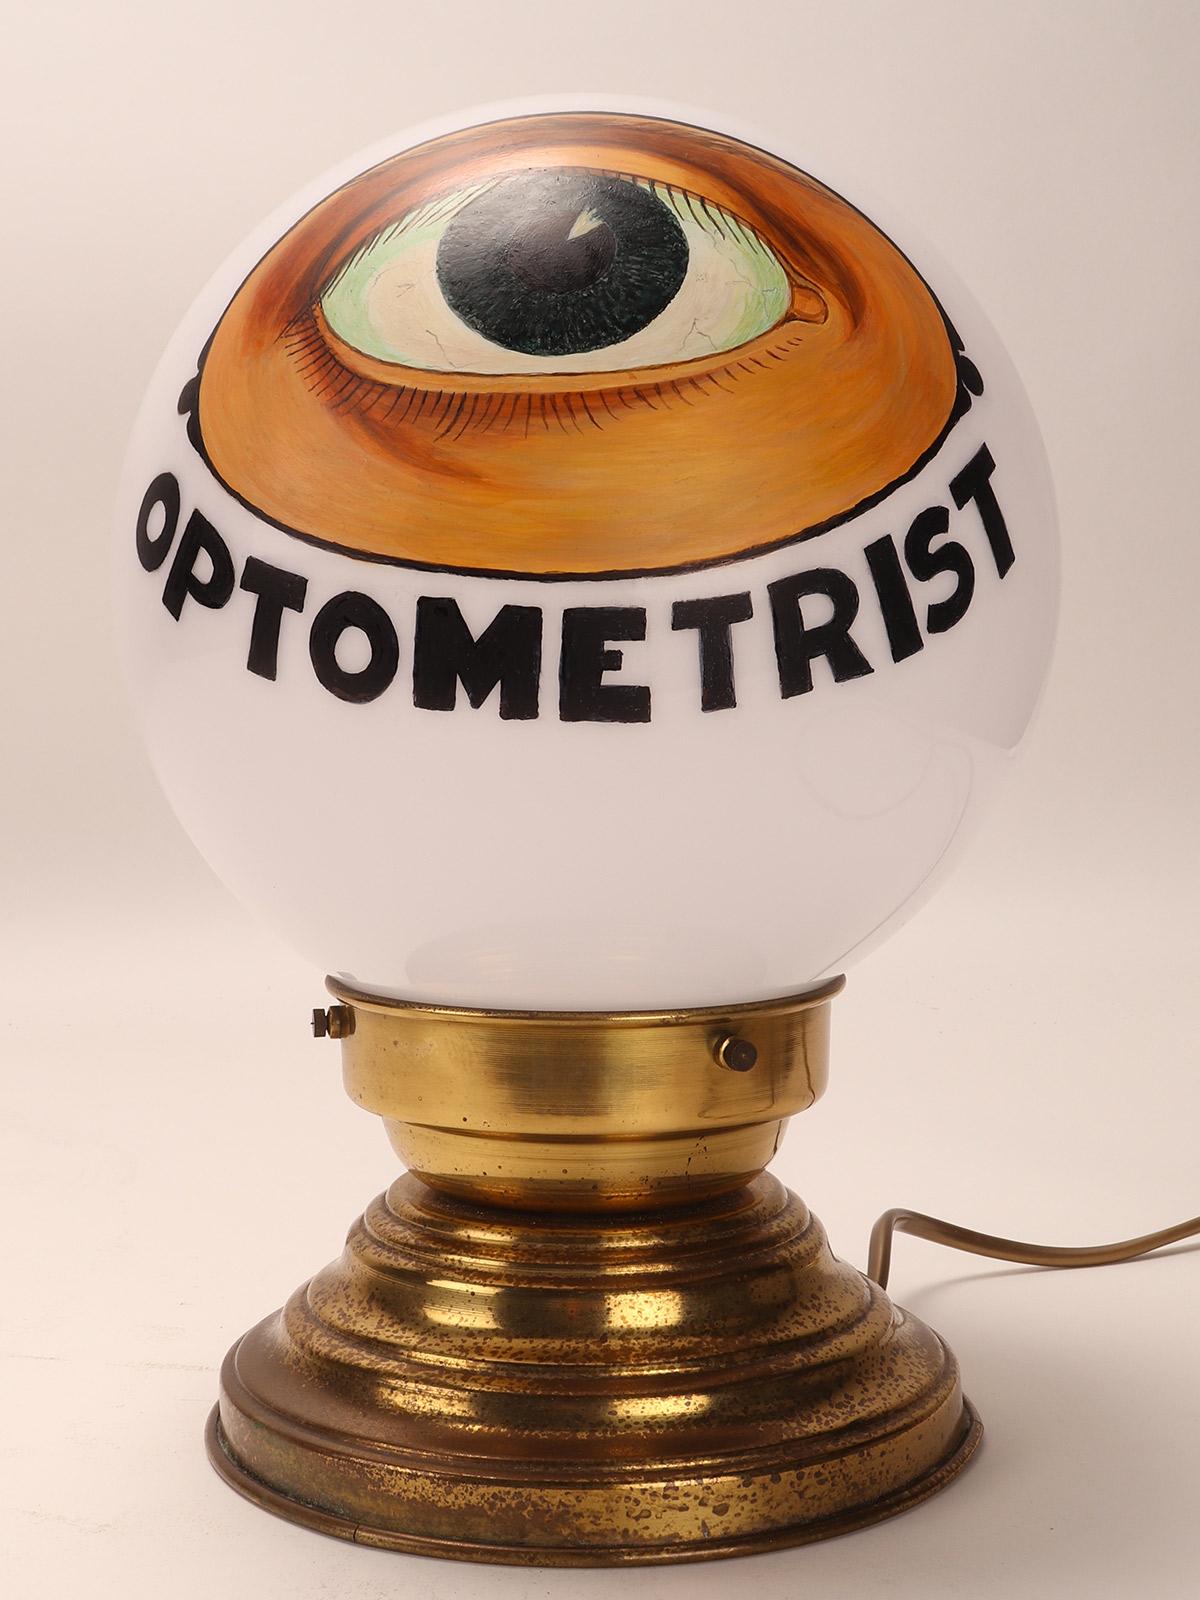 Shop Window Lamp Sign for an Optometrist, USA1950 For Sale 3